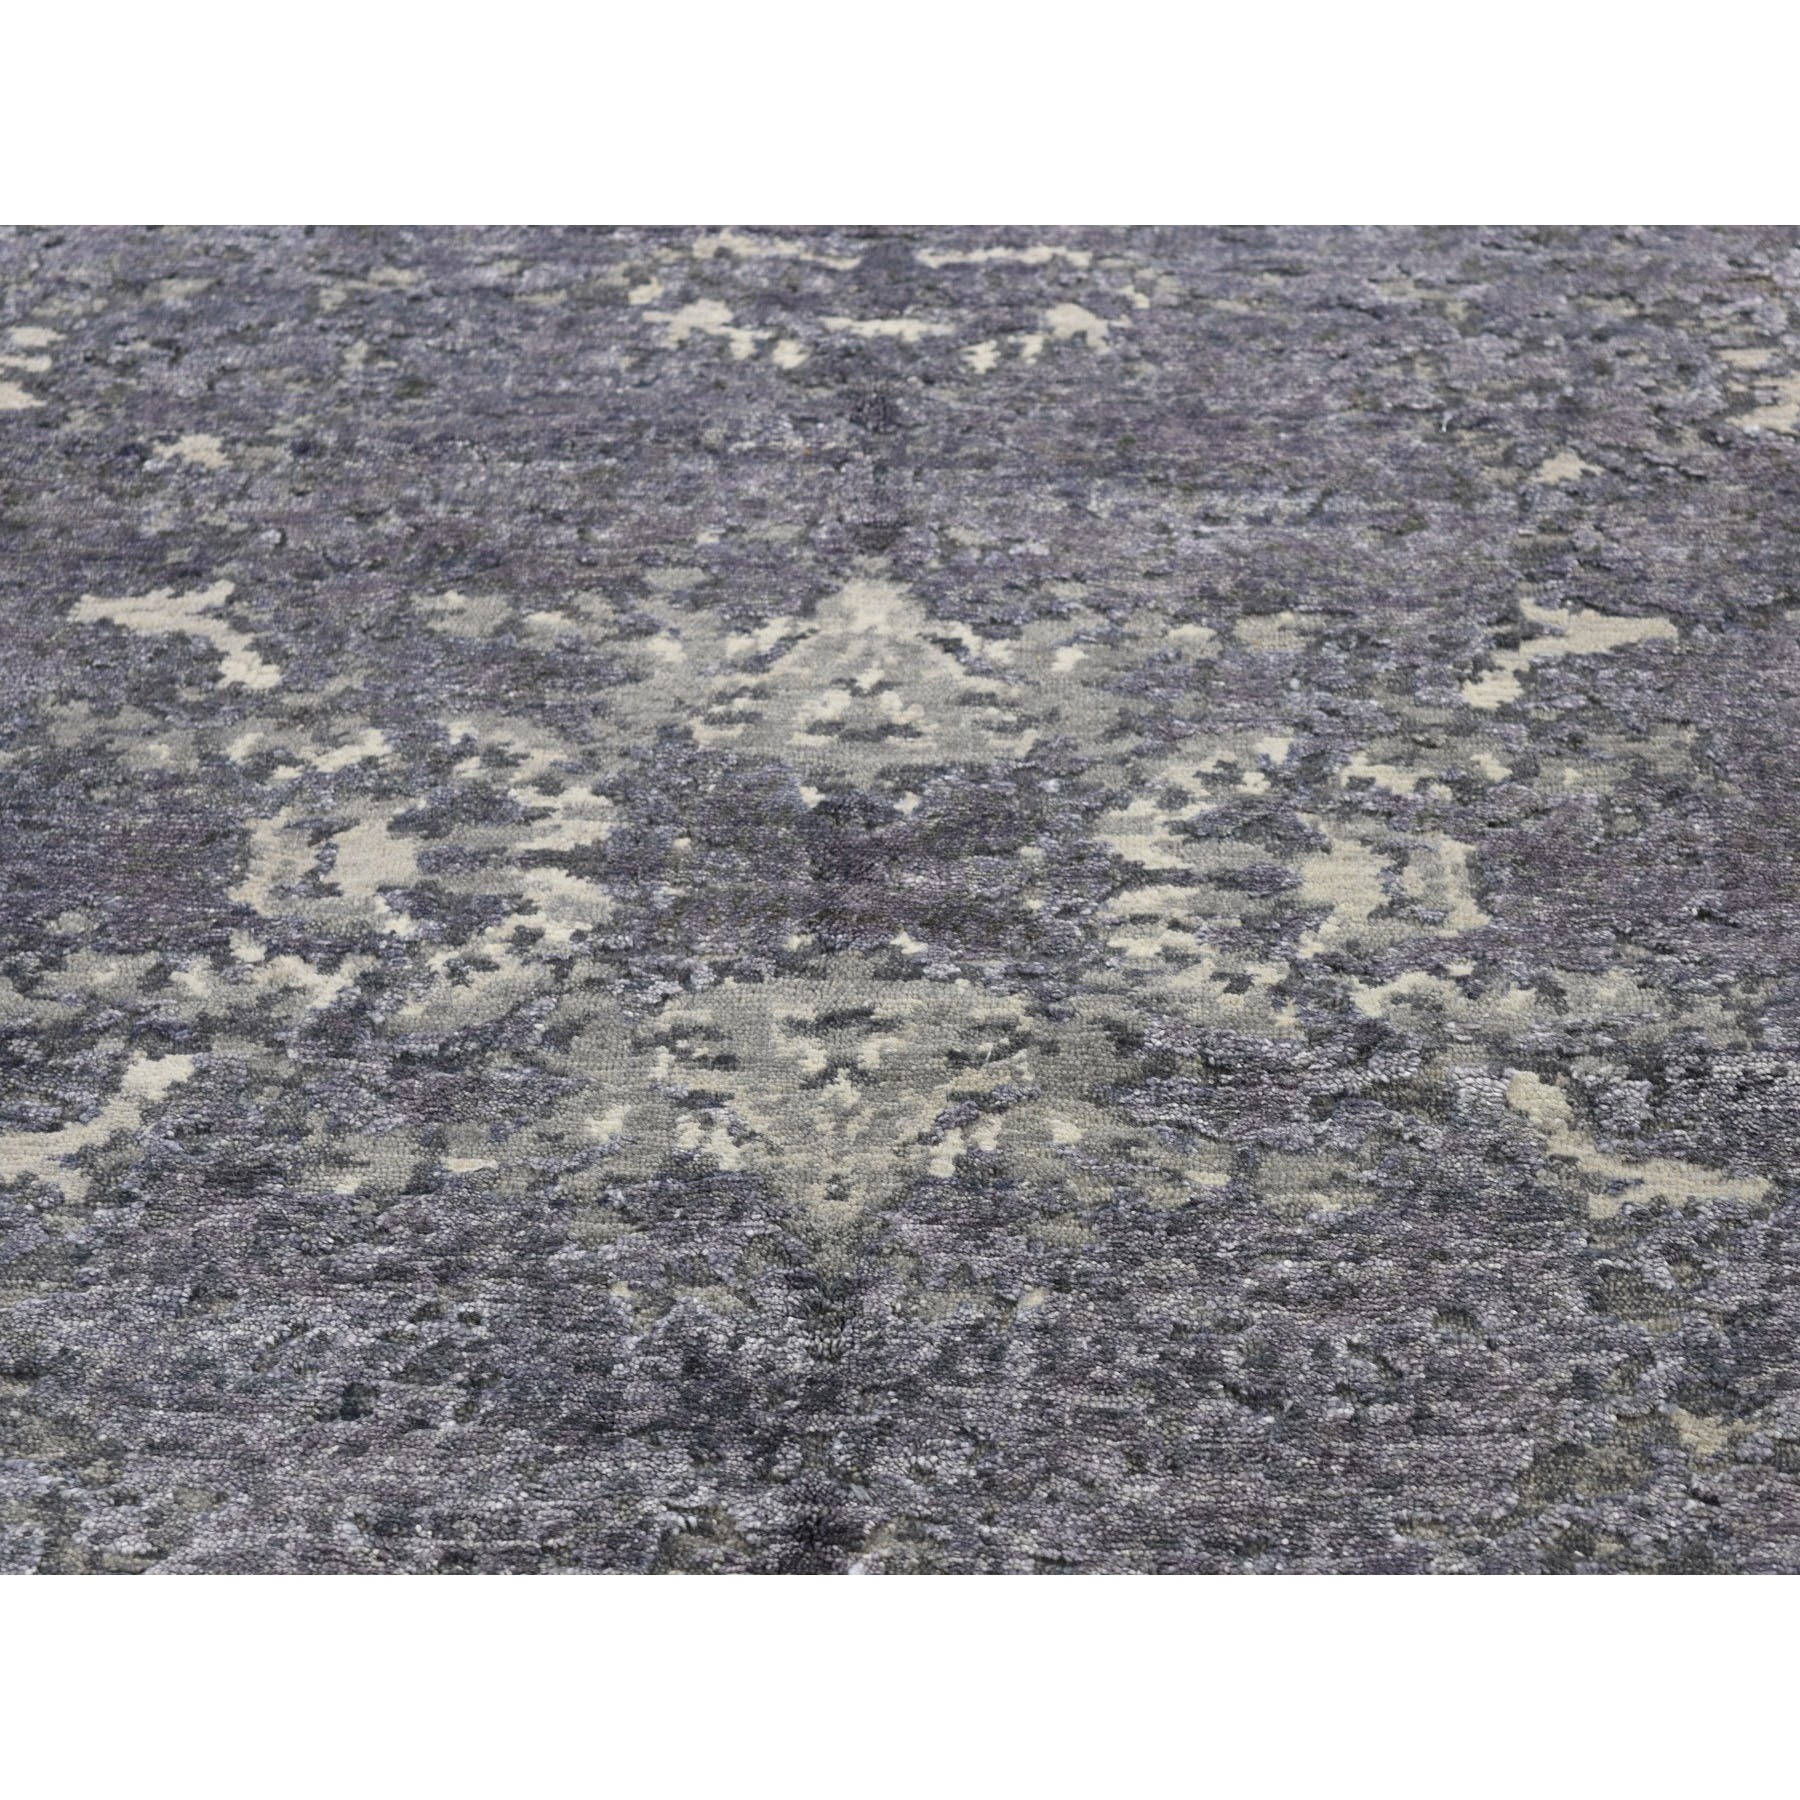 8'x9'9" Wool And Silk Abstract Tone-On-Tone Gray Hand Woven Oriental Rug 